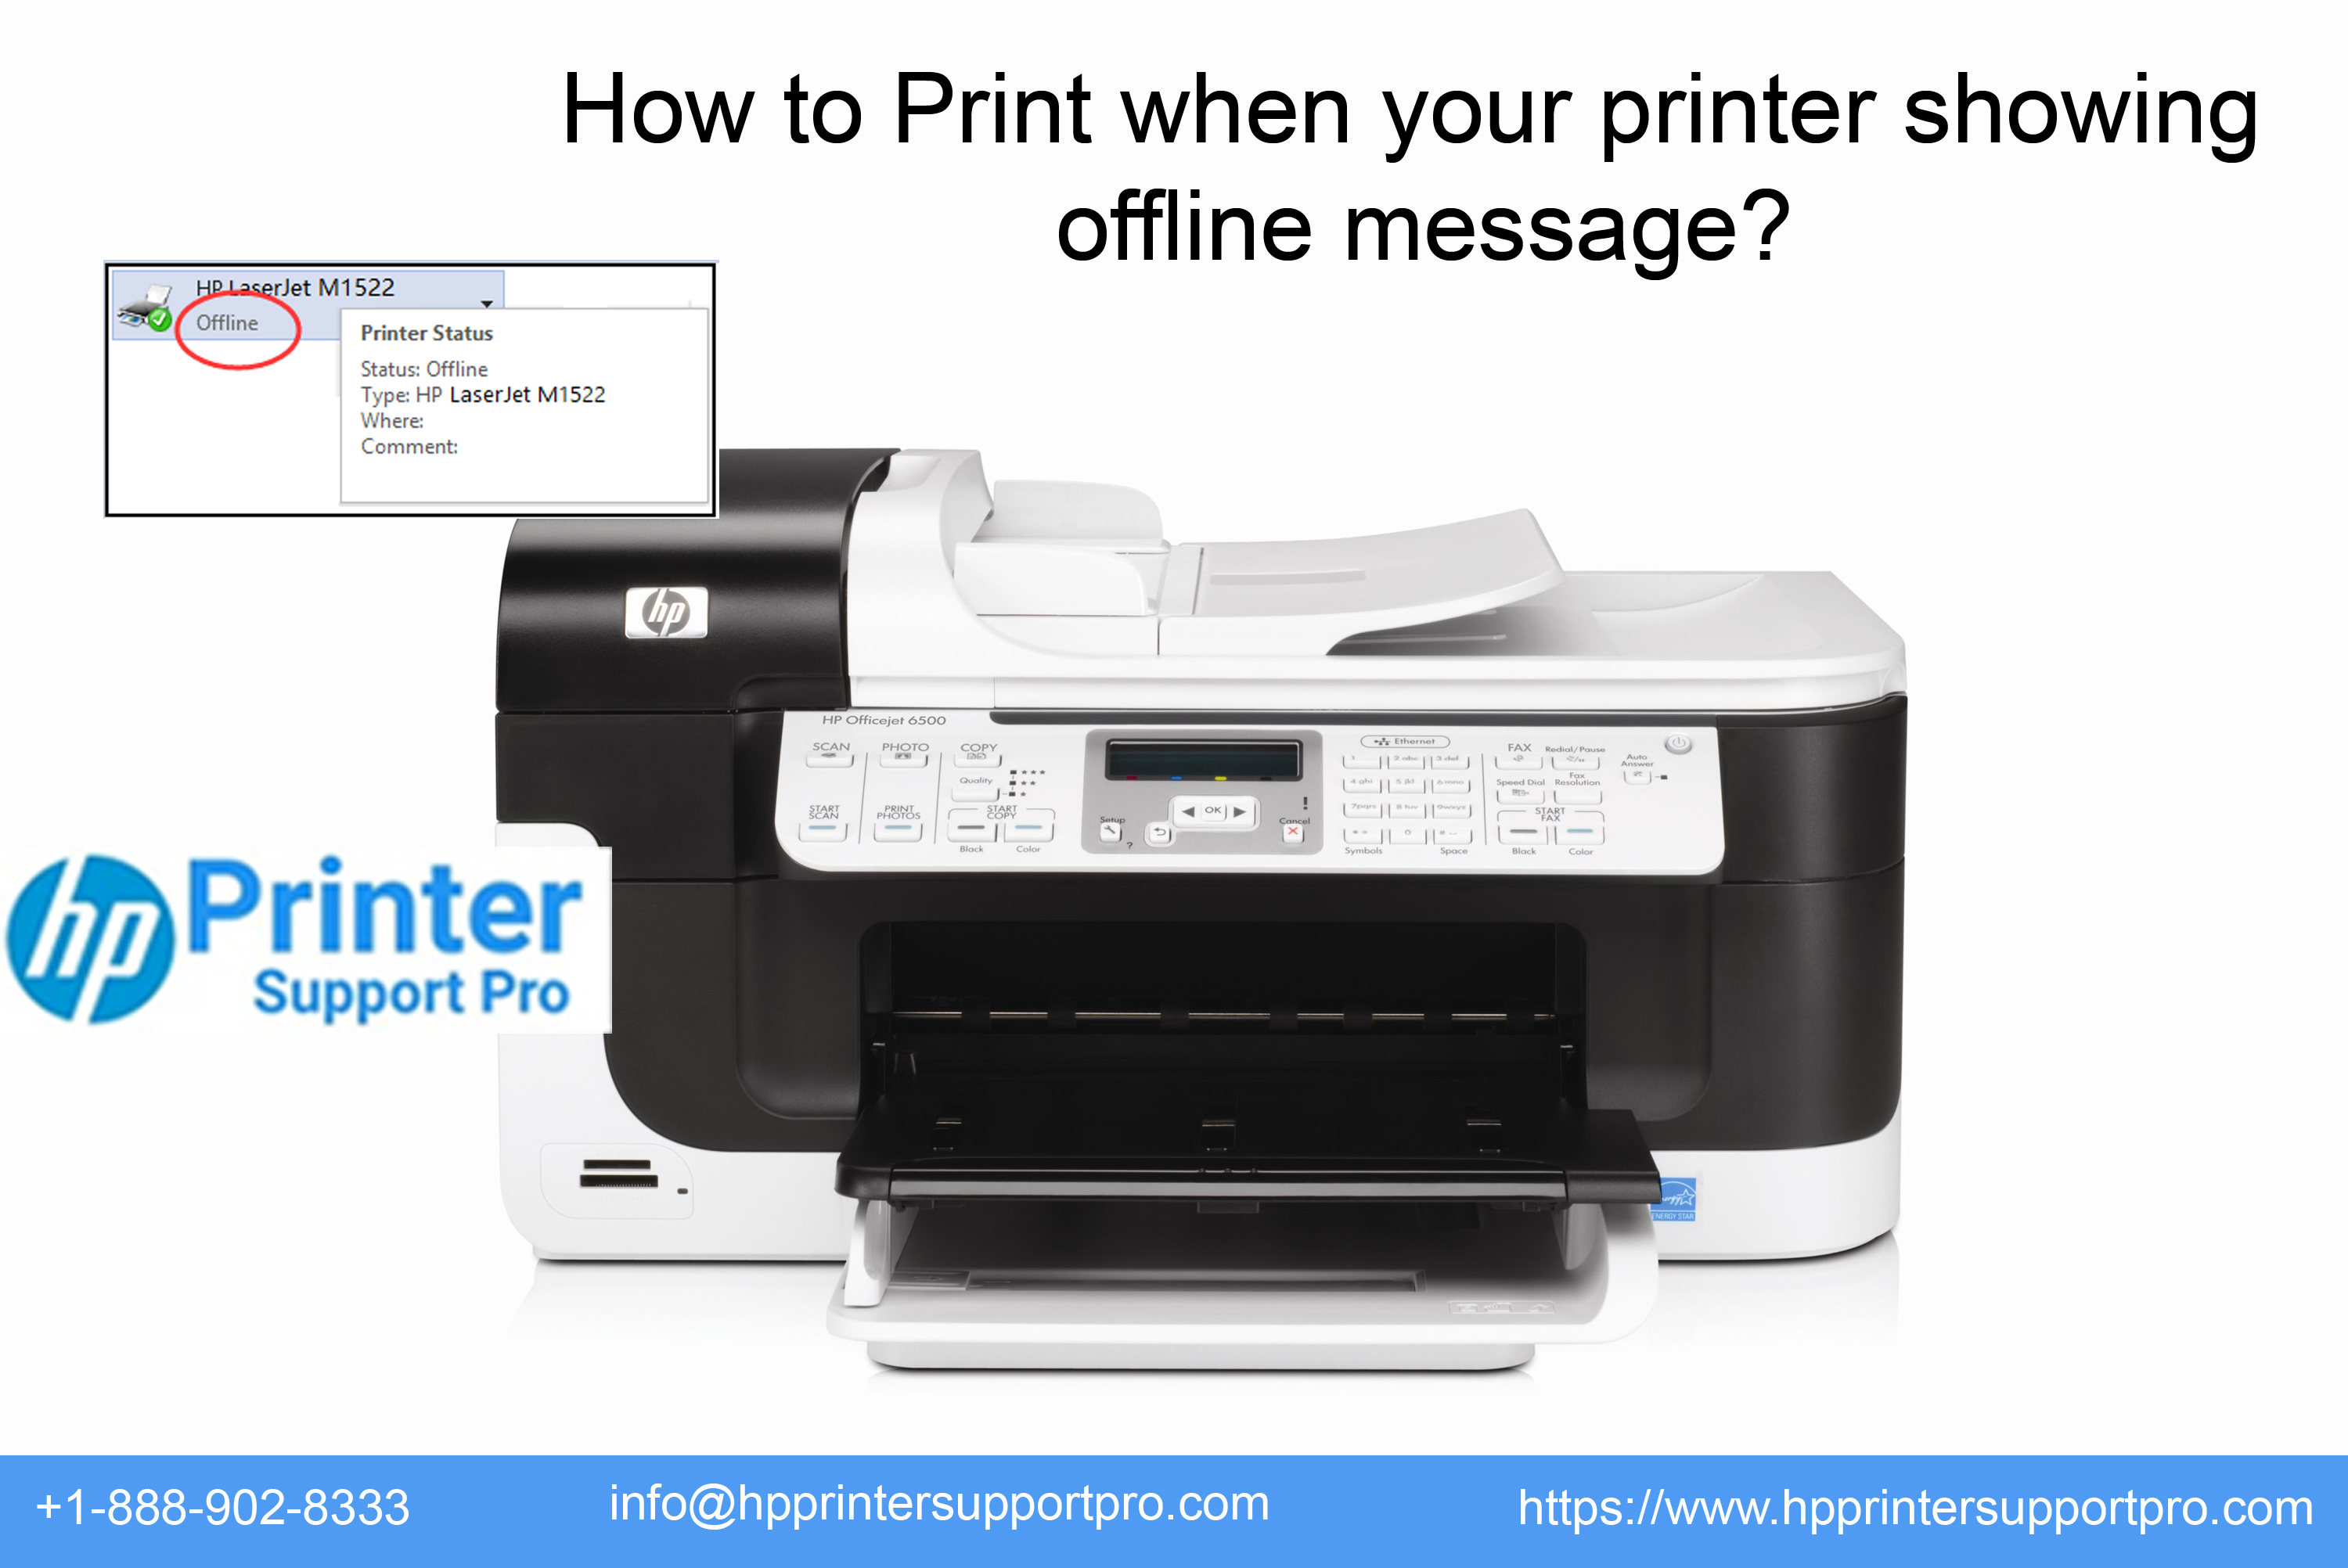 How To Print When Your Printer Showing offline Message?